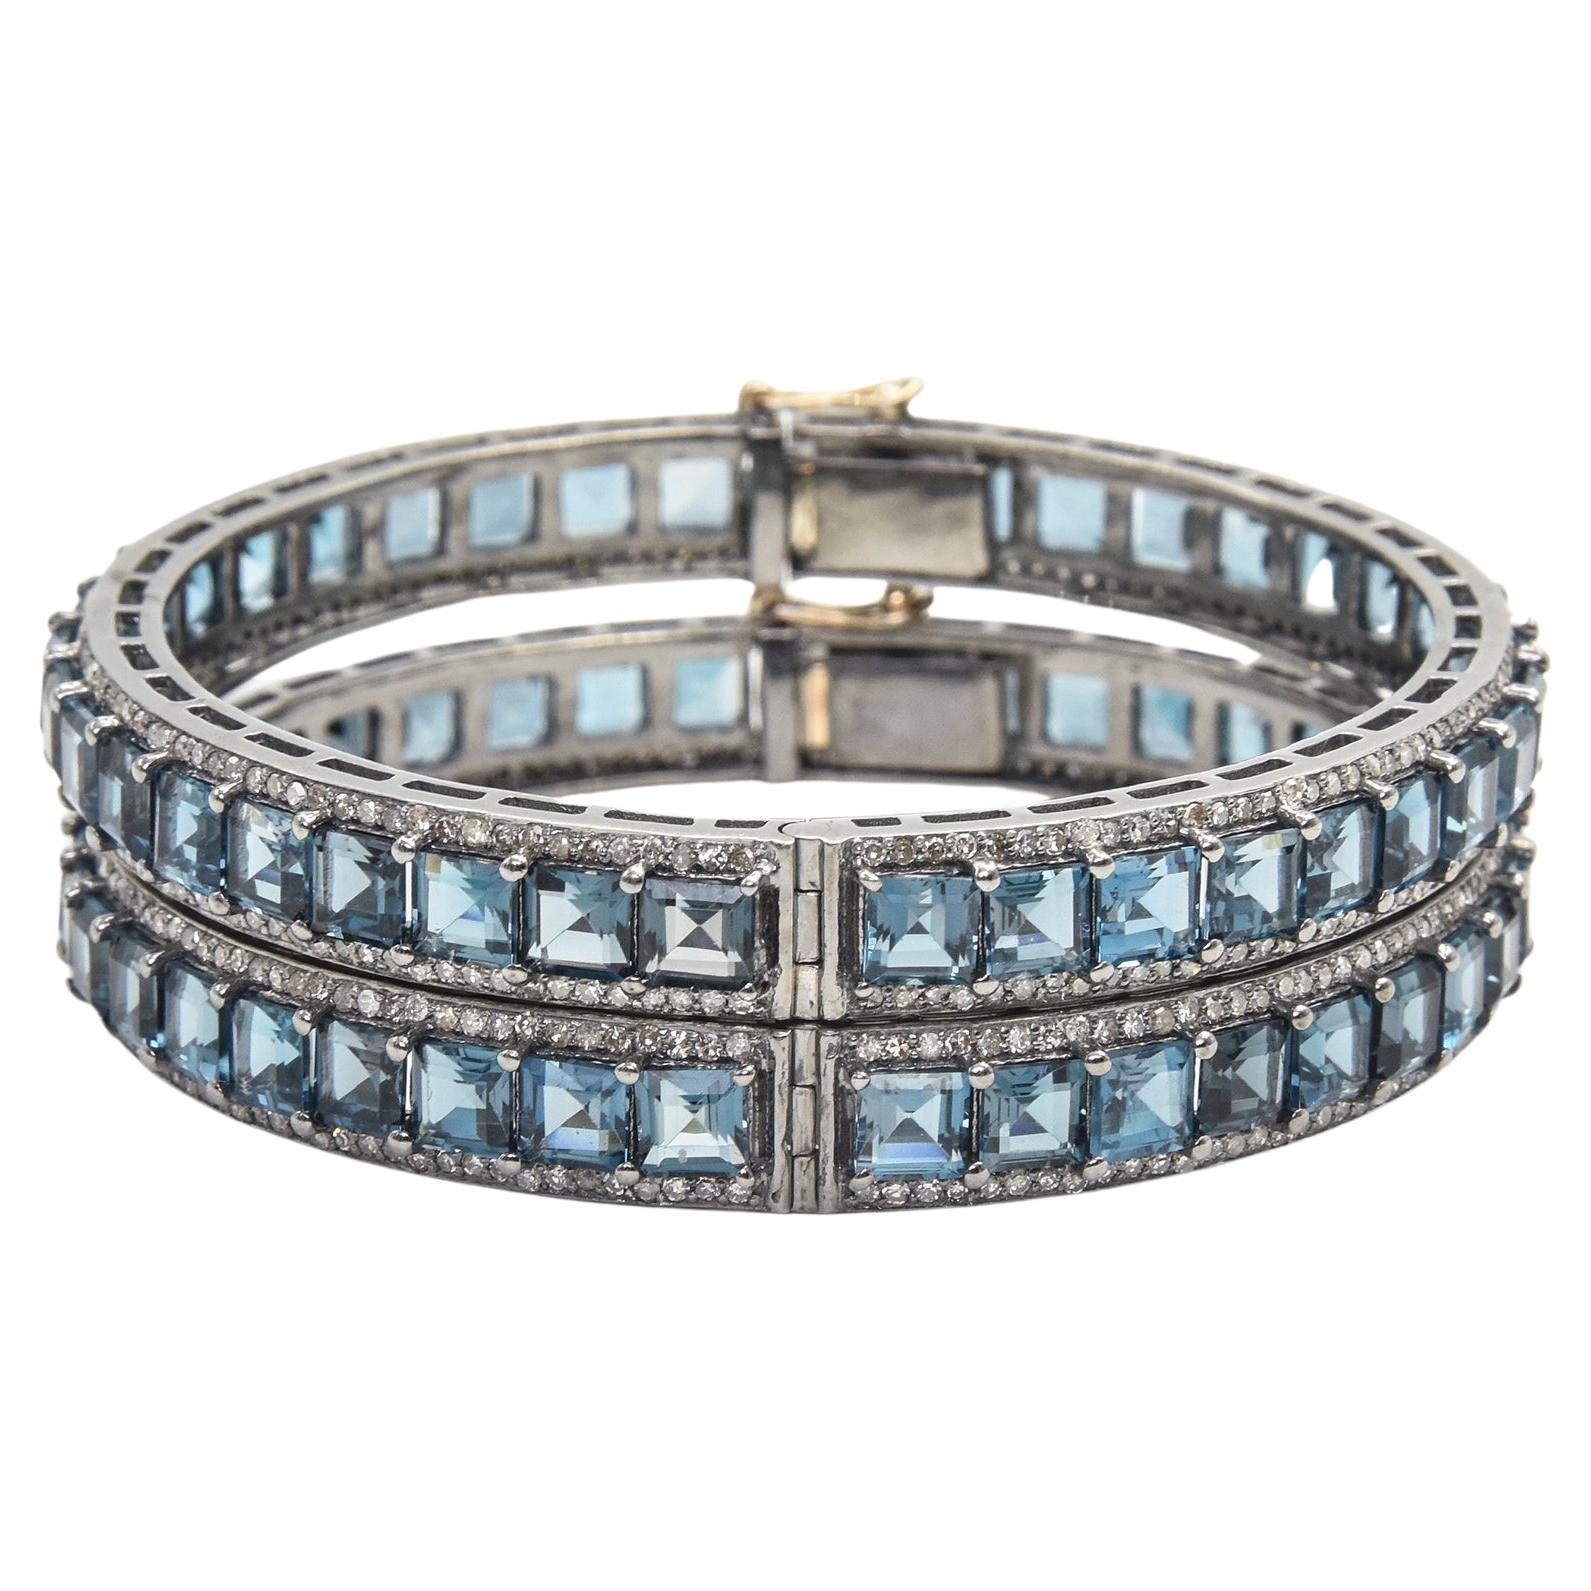 Pair of London blue topaz and diamond bangles mounted in sterling silver with a 14k gold tongue clasp and safety. Each bracelet contains princess cut blue topaz prong set down the center with round diamonds along the side edges.  The 2 bracelets